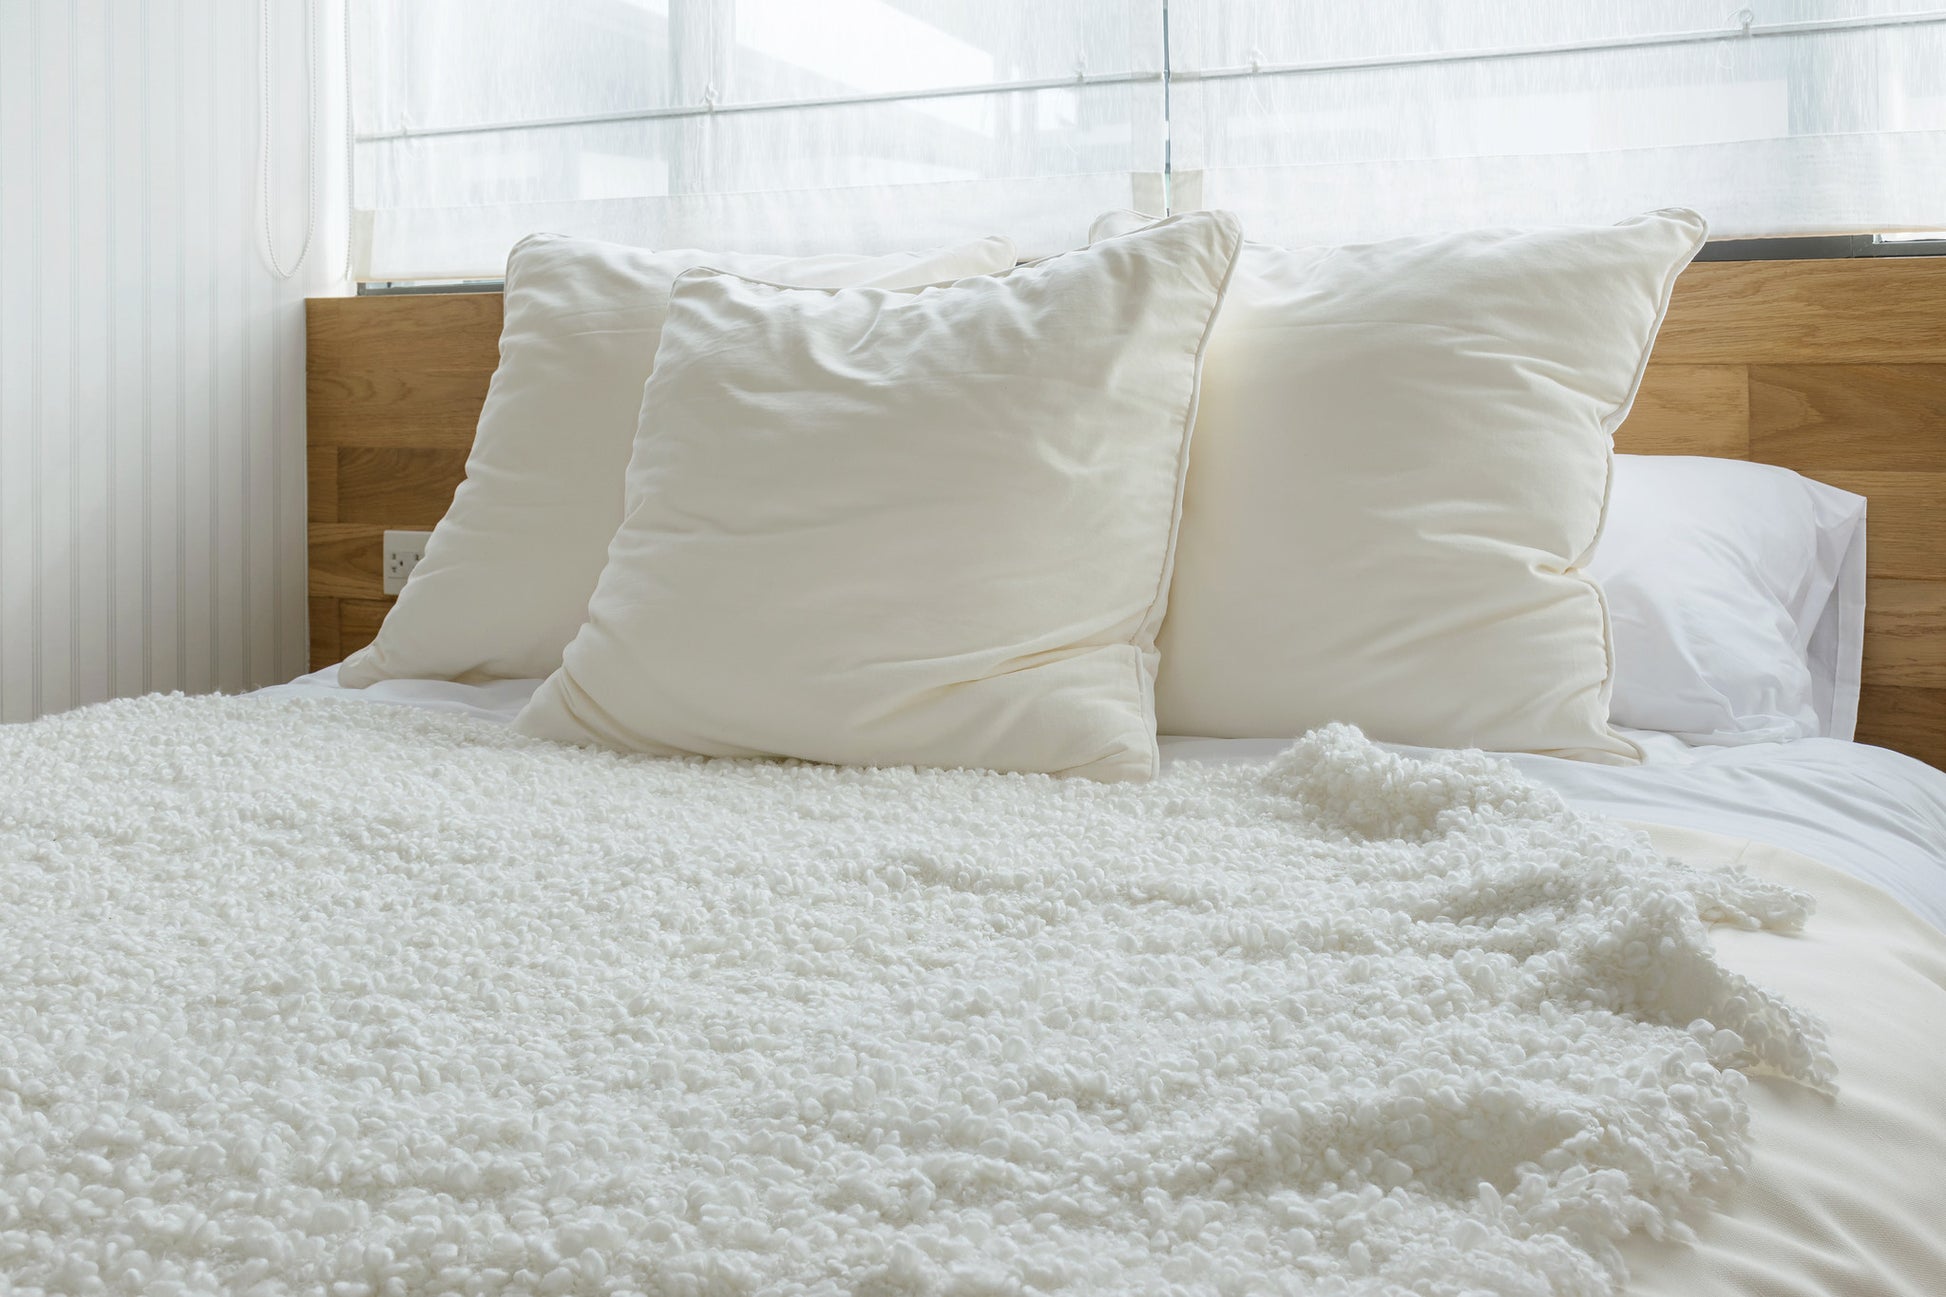 DIY organic mattress for your chemical free bed 